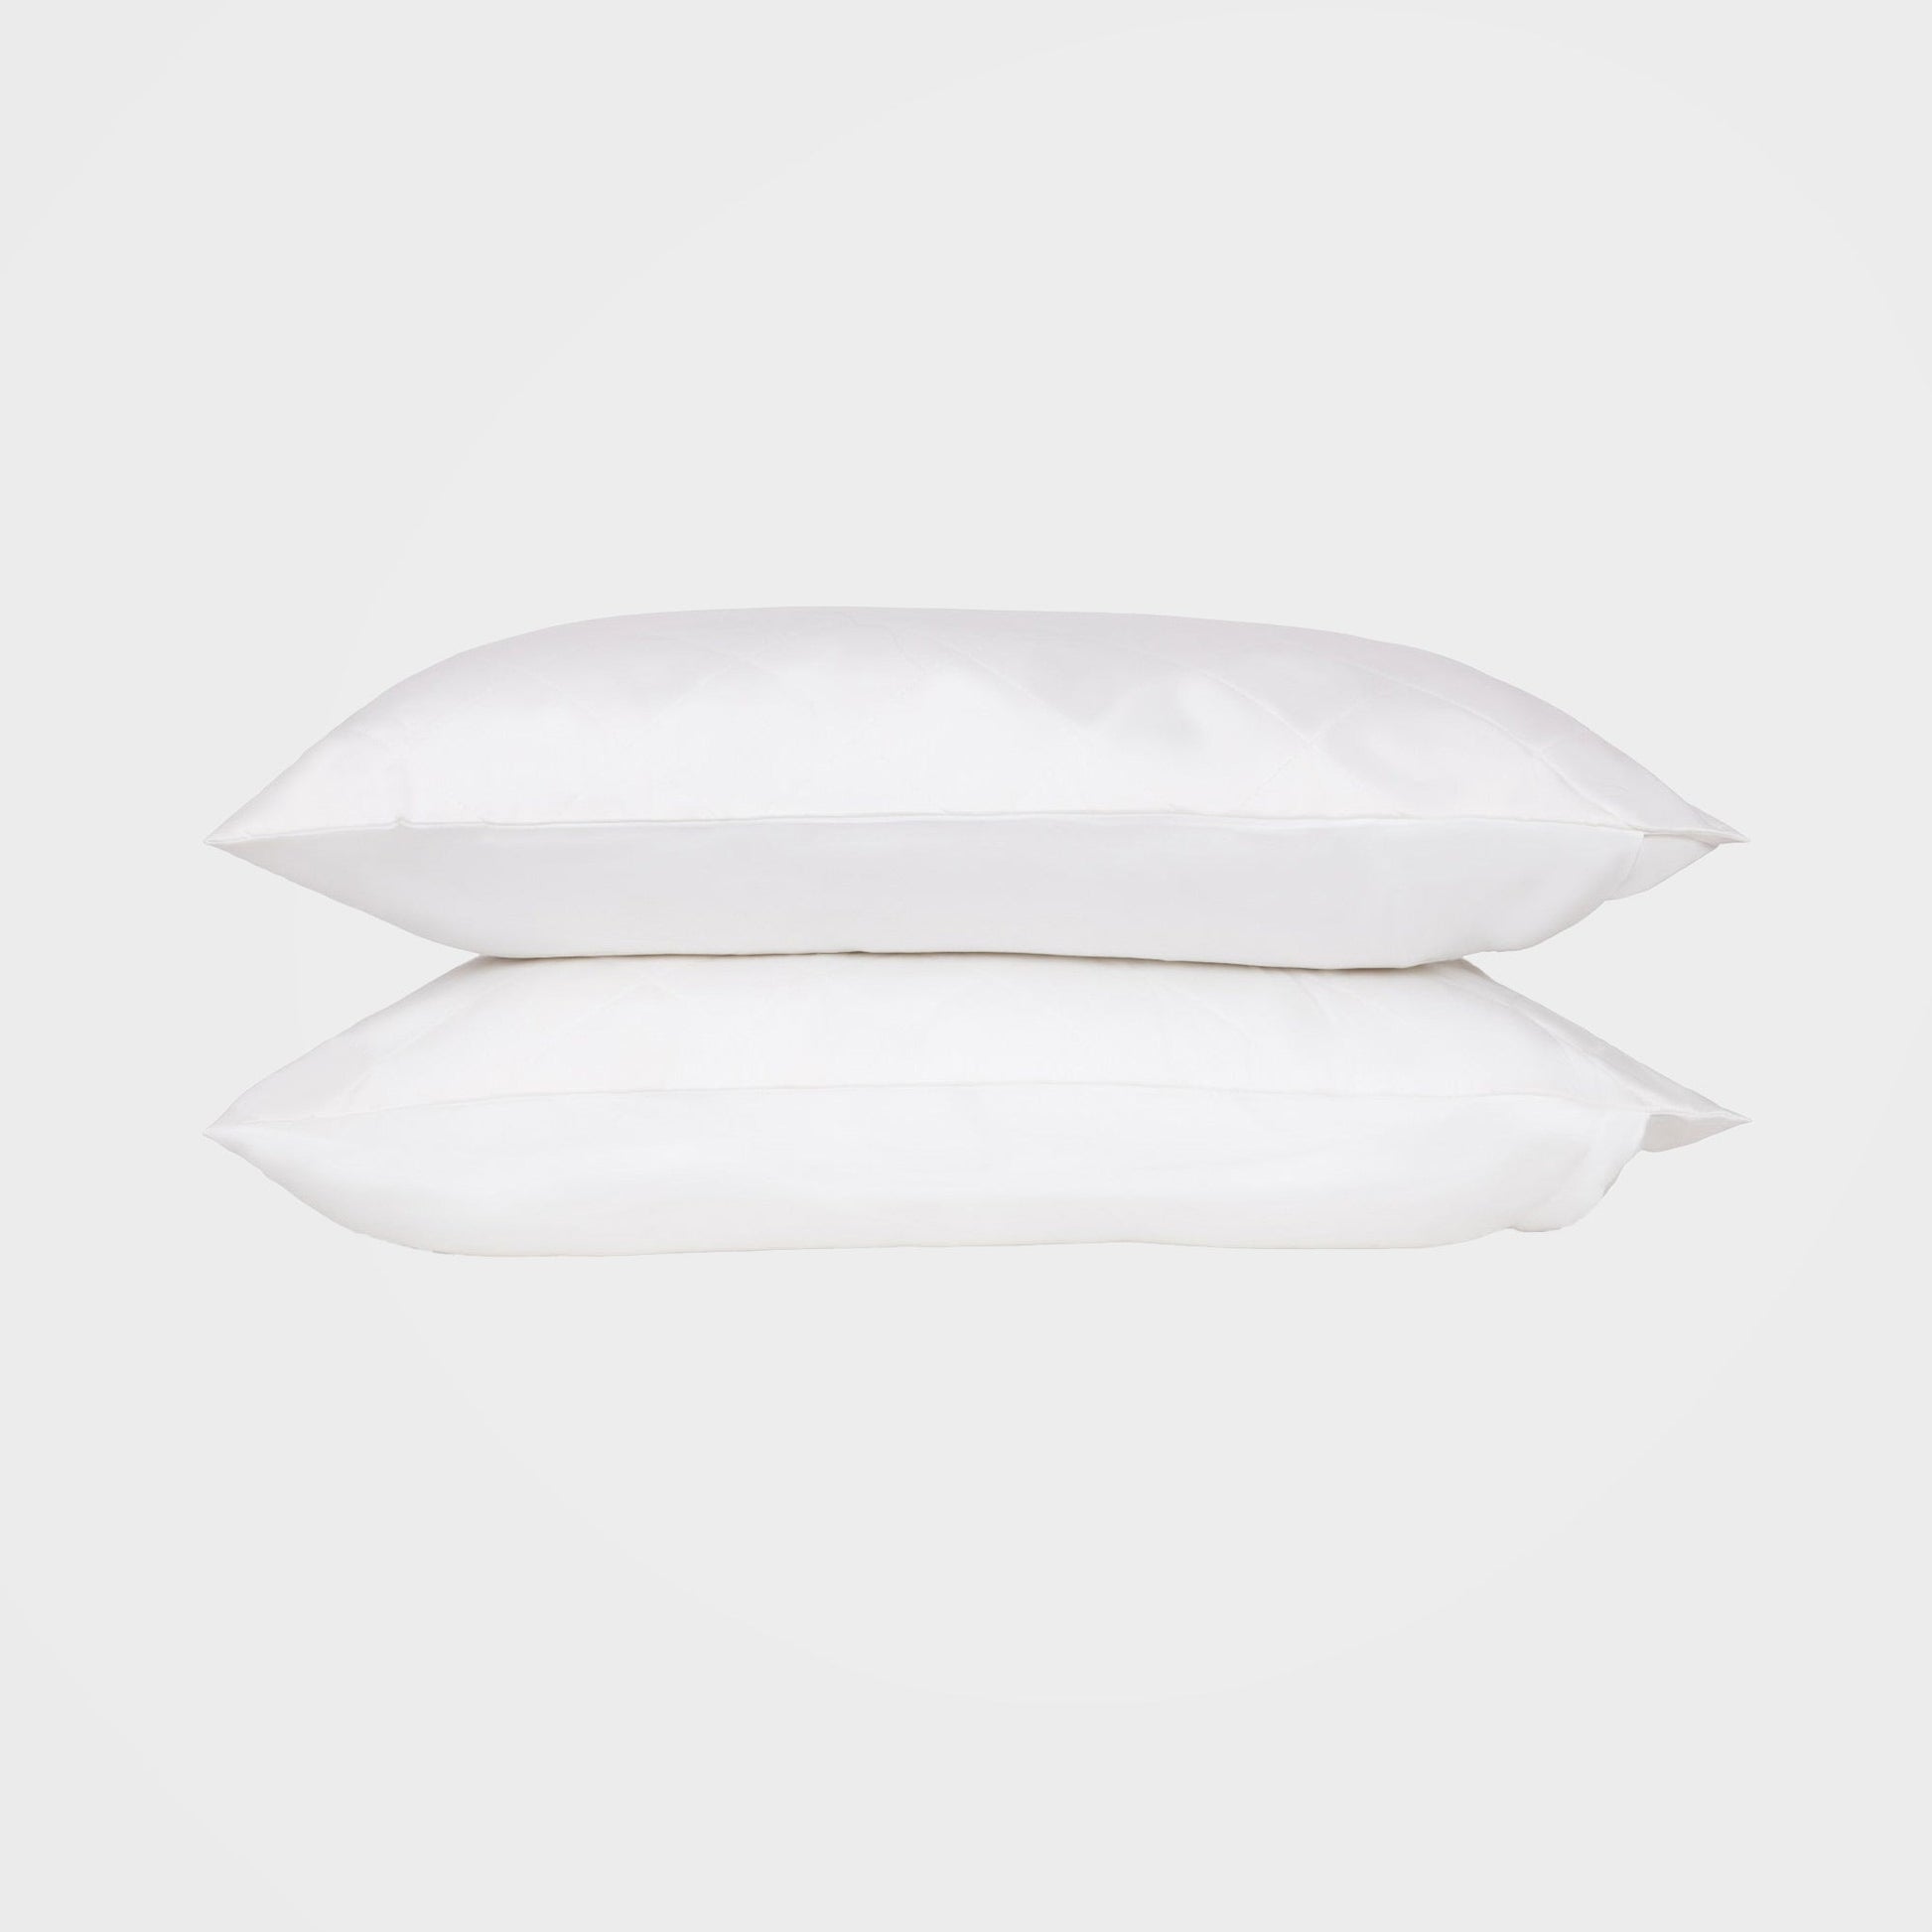 Bamboo Pillow Protectors Made From Eucalyptus & Bamboo - By Ethical Bedding